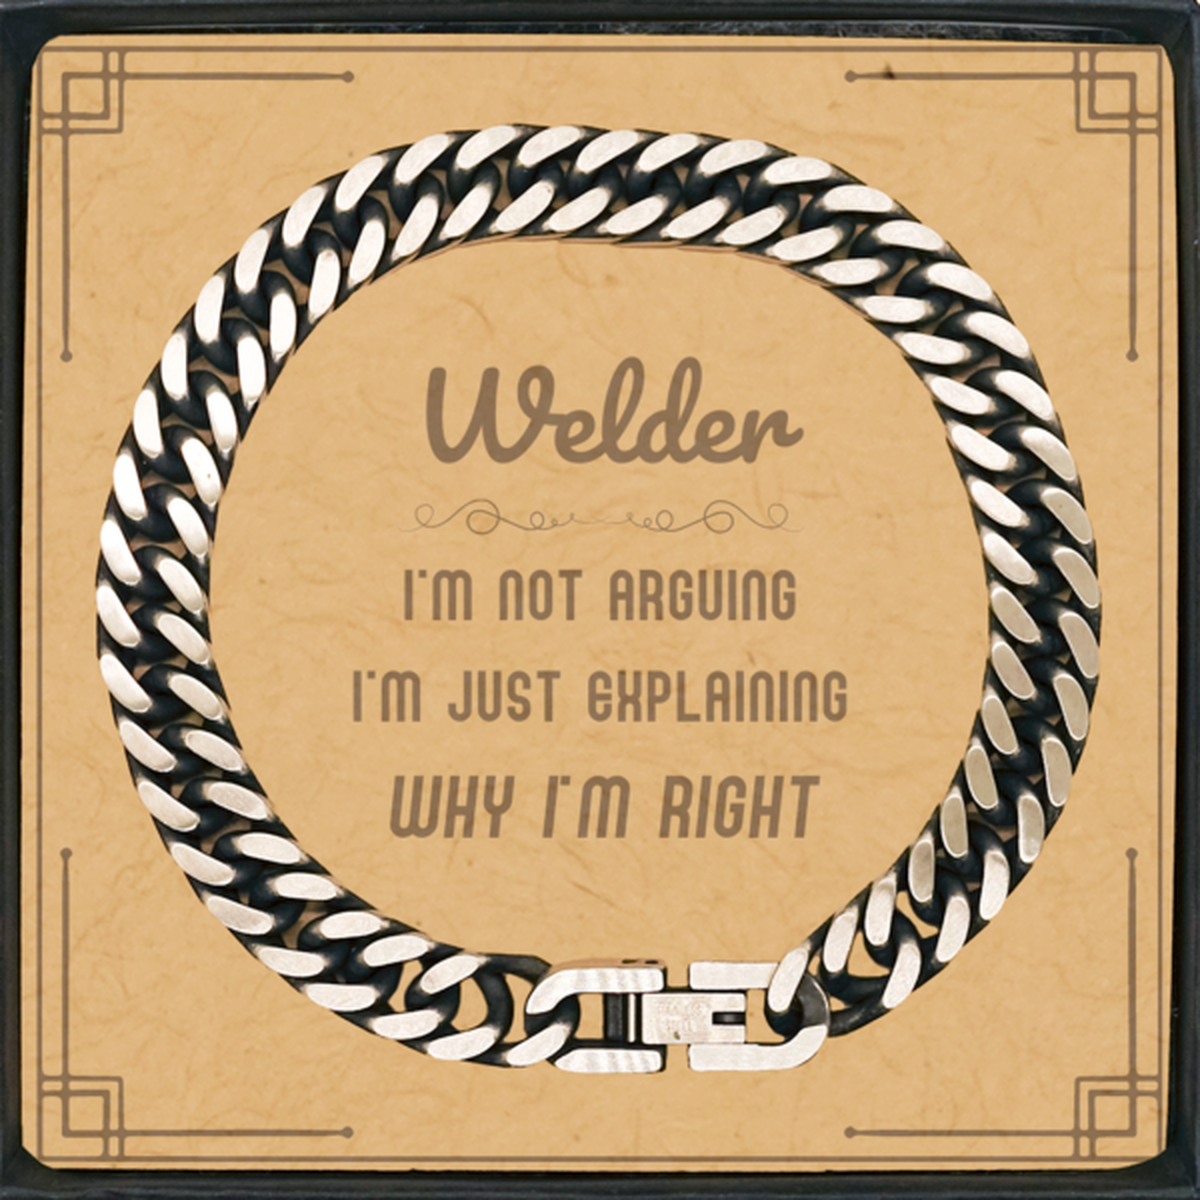 Welder I'm not Arguing. I'm Just Explaining Why I'm RIGHT Cuban Link Chain Bracelet, Funny Saying Quote Welder Gifts For Welder Message Card Graduation Birthday Christmas Gifts for Men Women Coworker